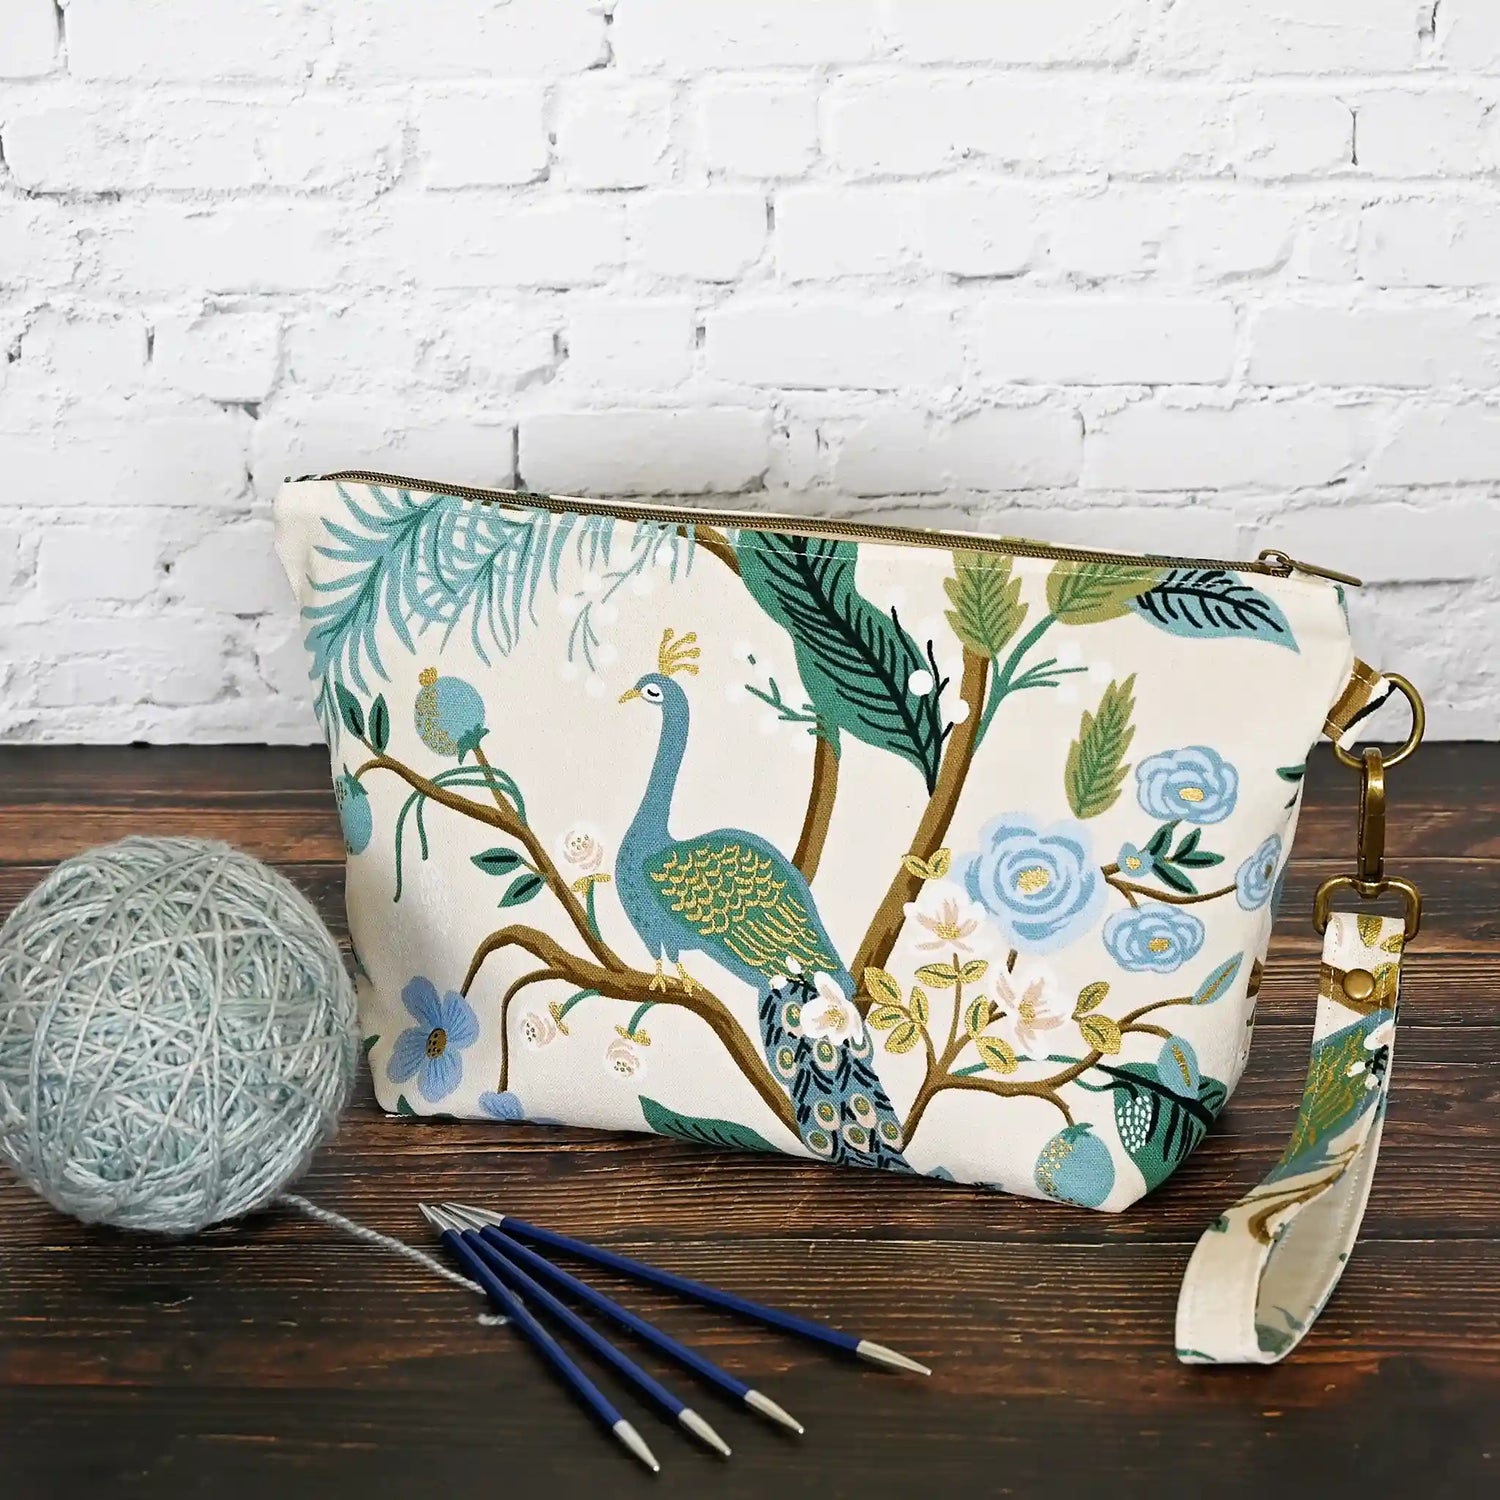 Gorgeous peacock canvas zippered pouch from Rifle Paper Co's Antique Garden collection.  Handmade in Nova Scotia, Canada.a